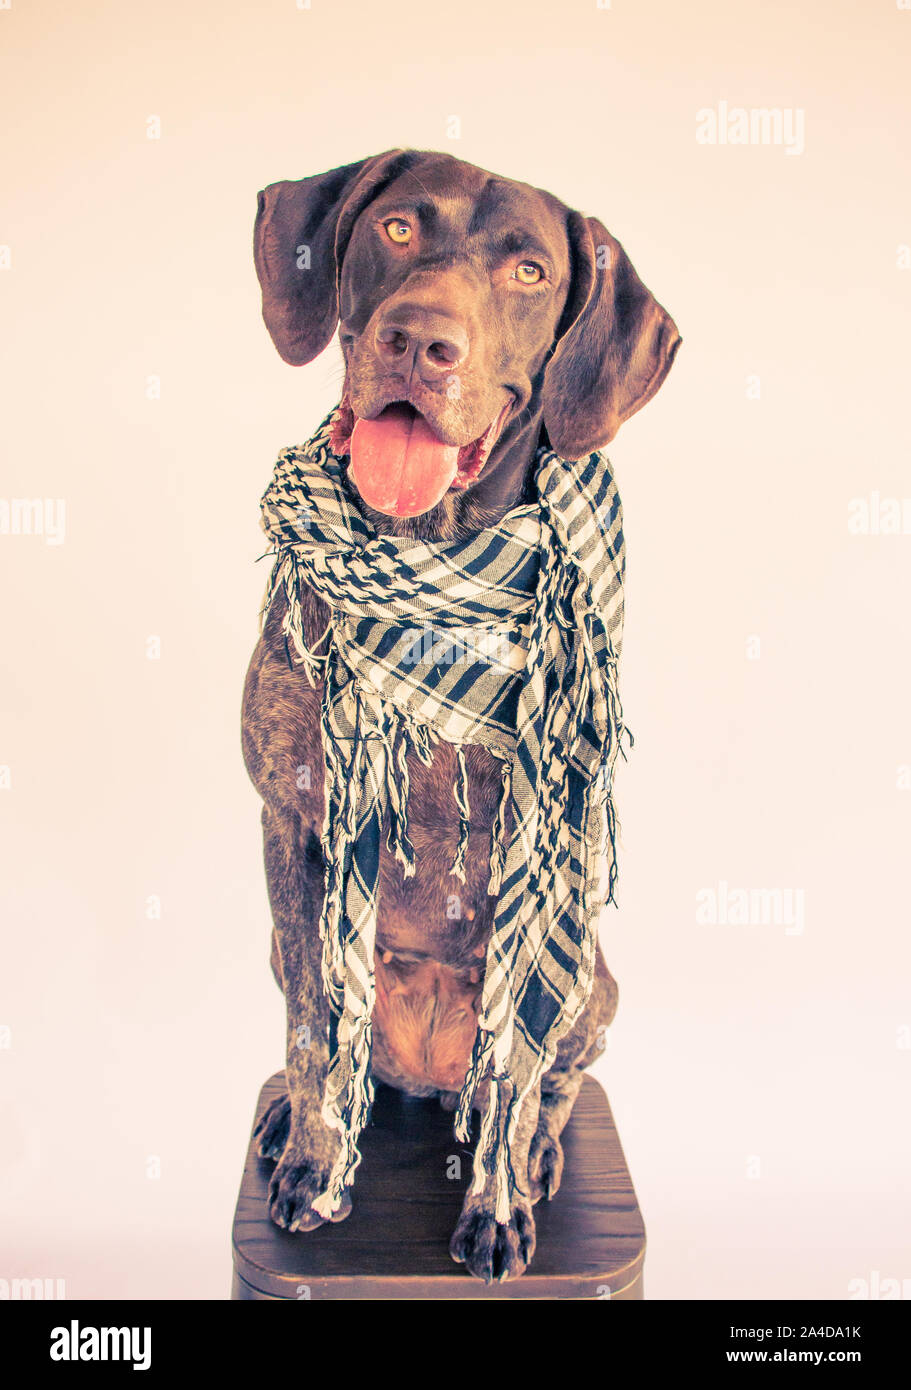 German short-haired pointer sitting on a stool wearing a scarf Stock Photo